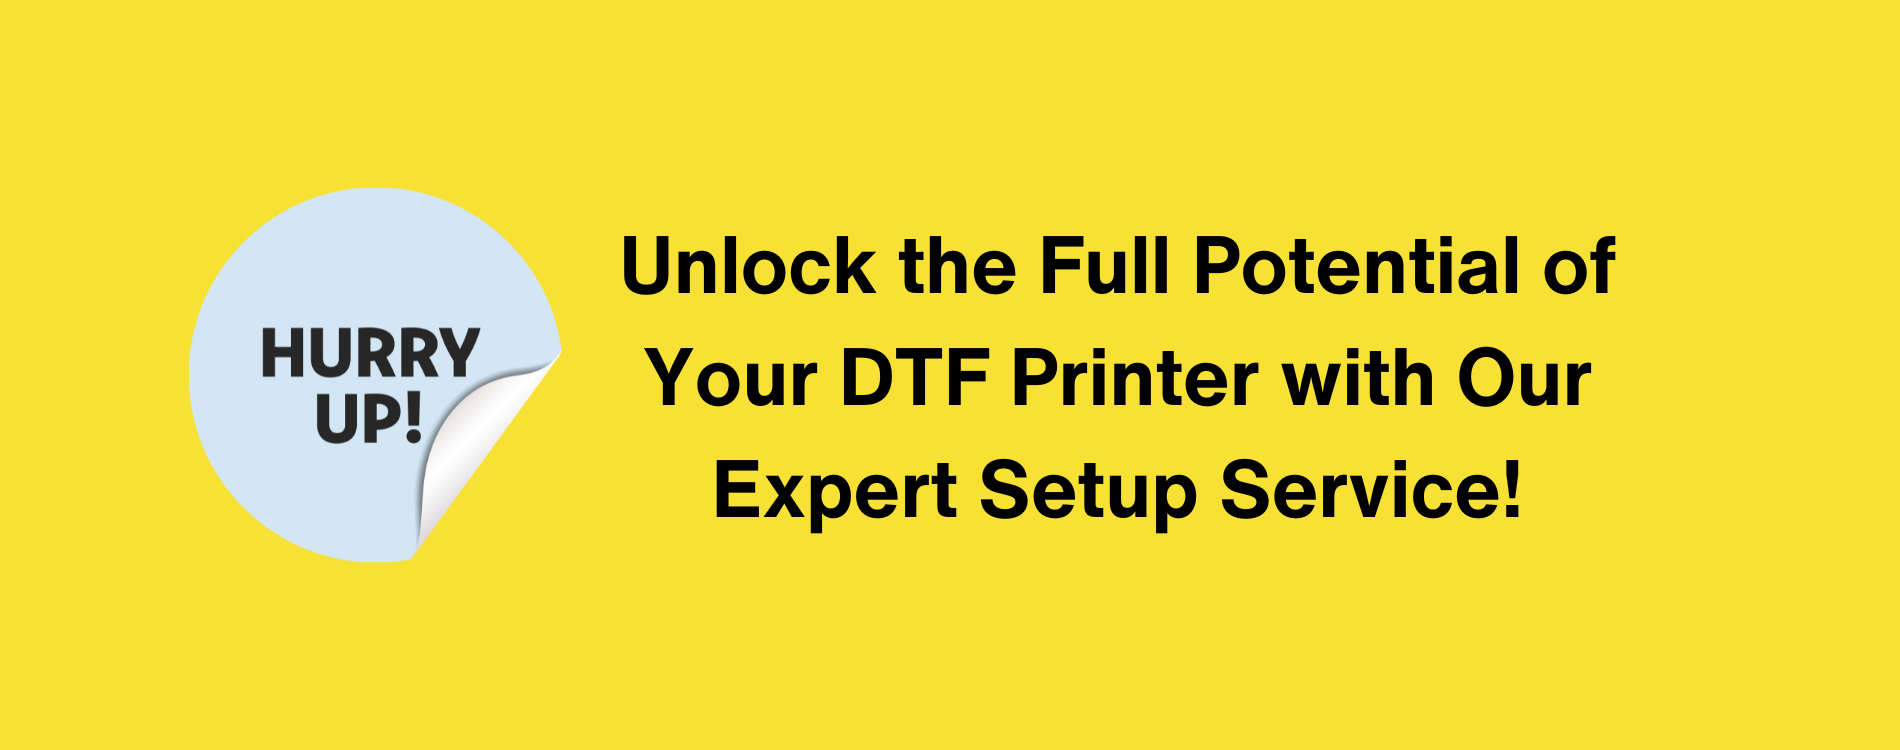 Unlock the Full Potential of Your DTF Printer with Our Expert Setup Service!